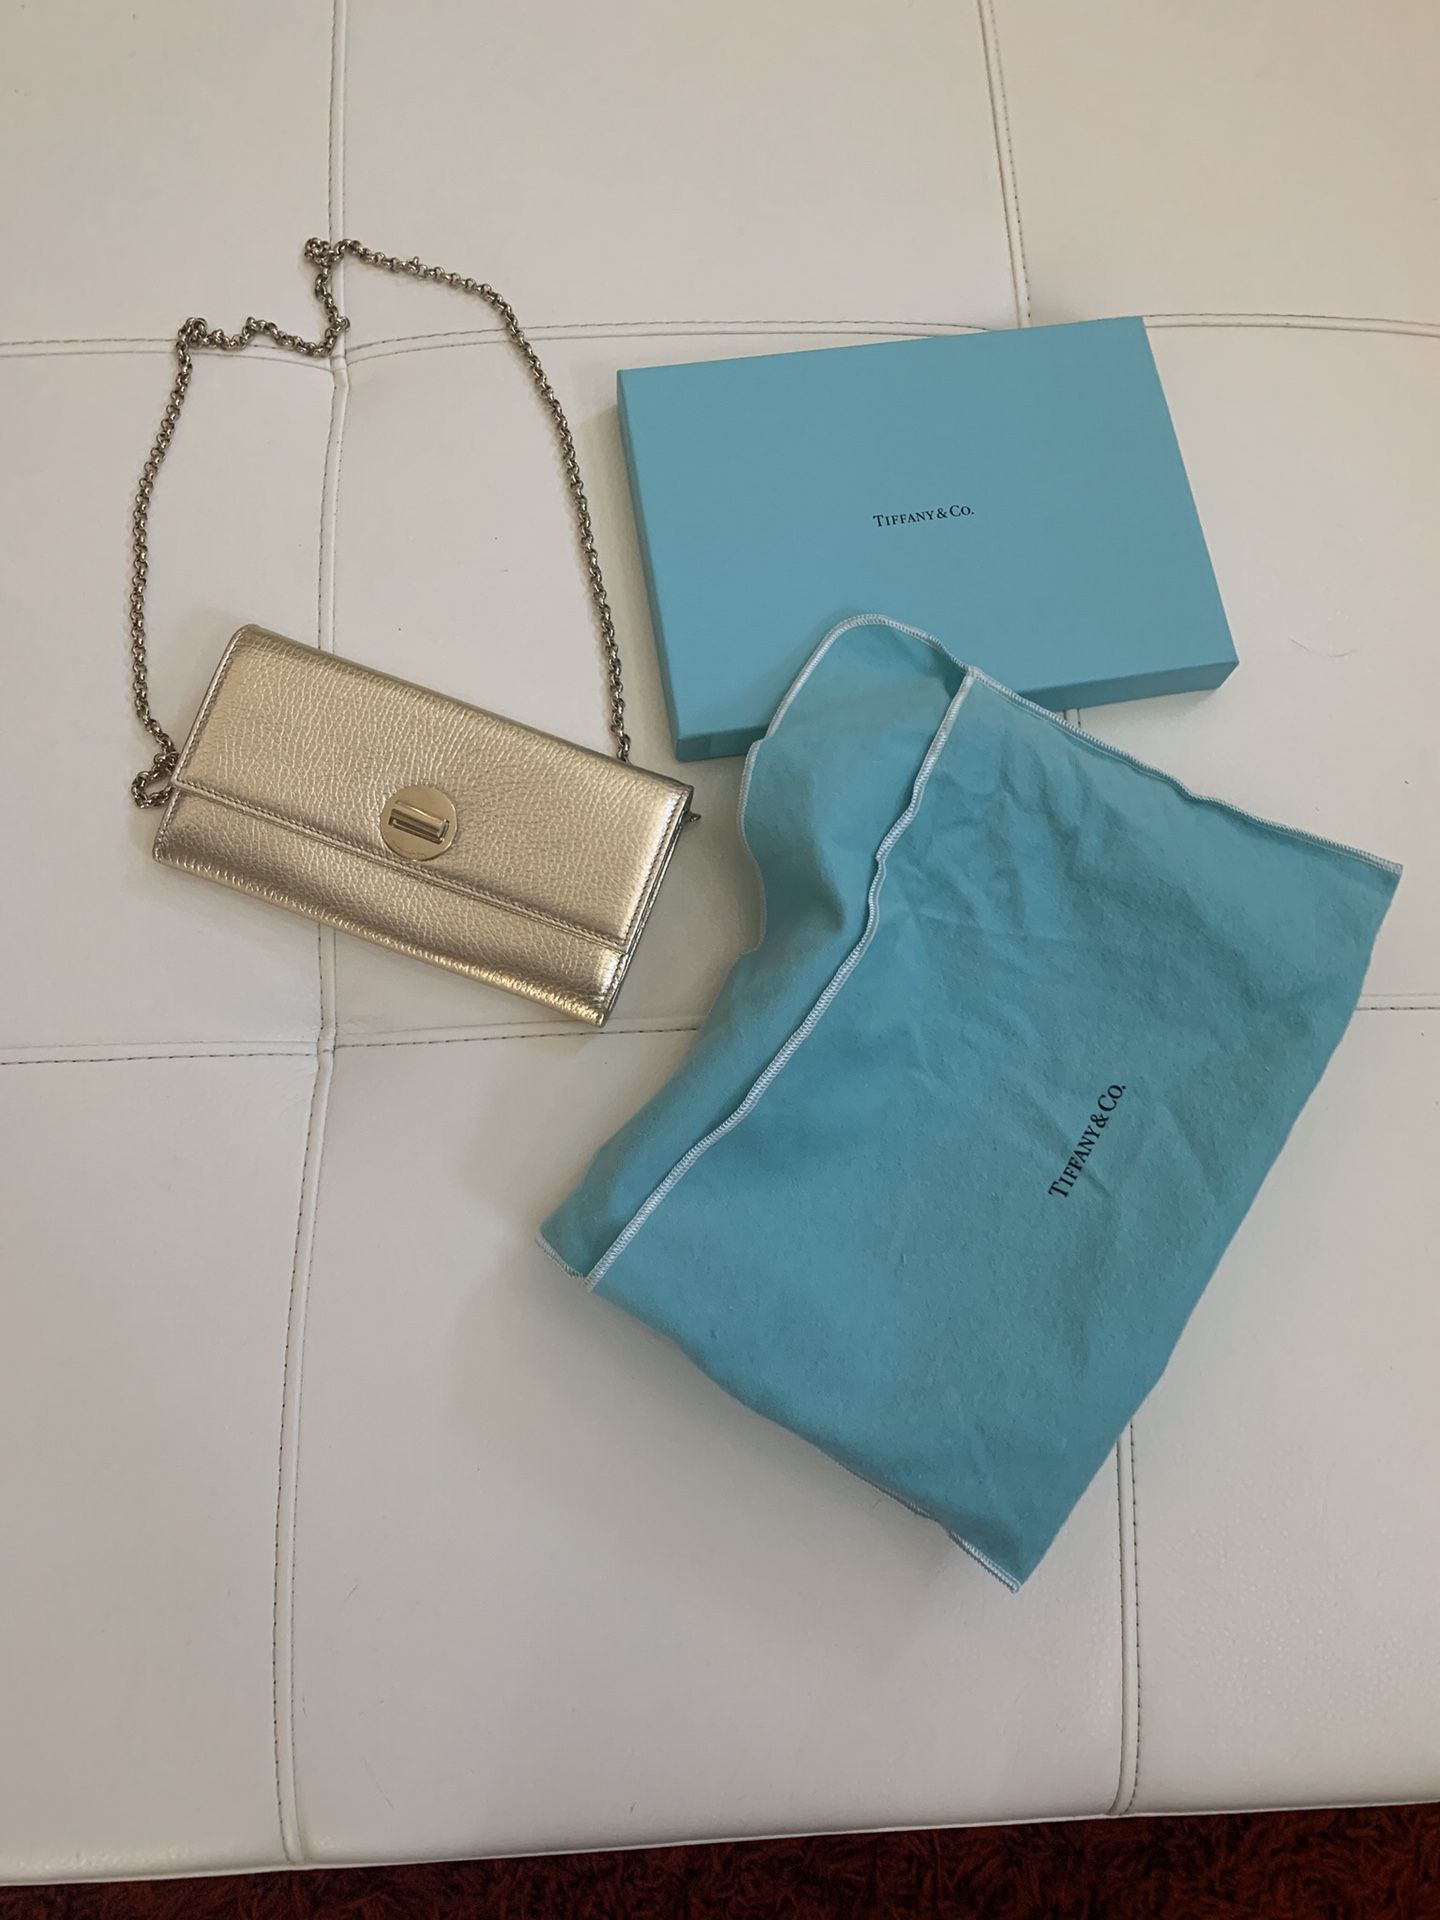 Tiffany & Co Metallic Gold Wallet Brand New For Sale.